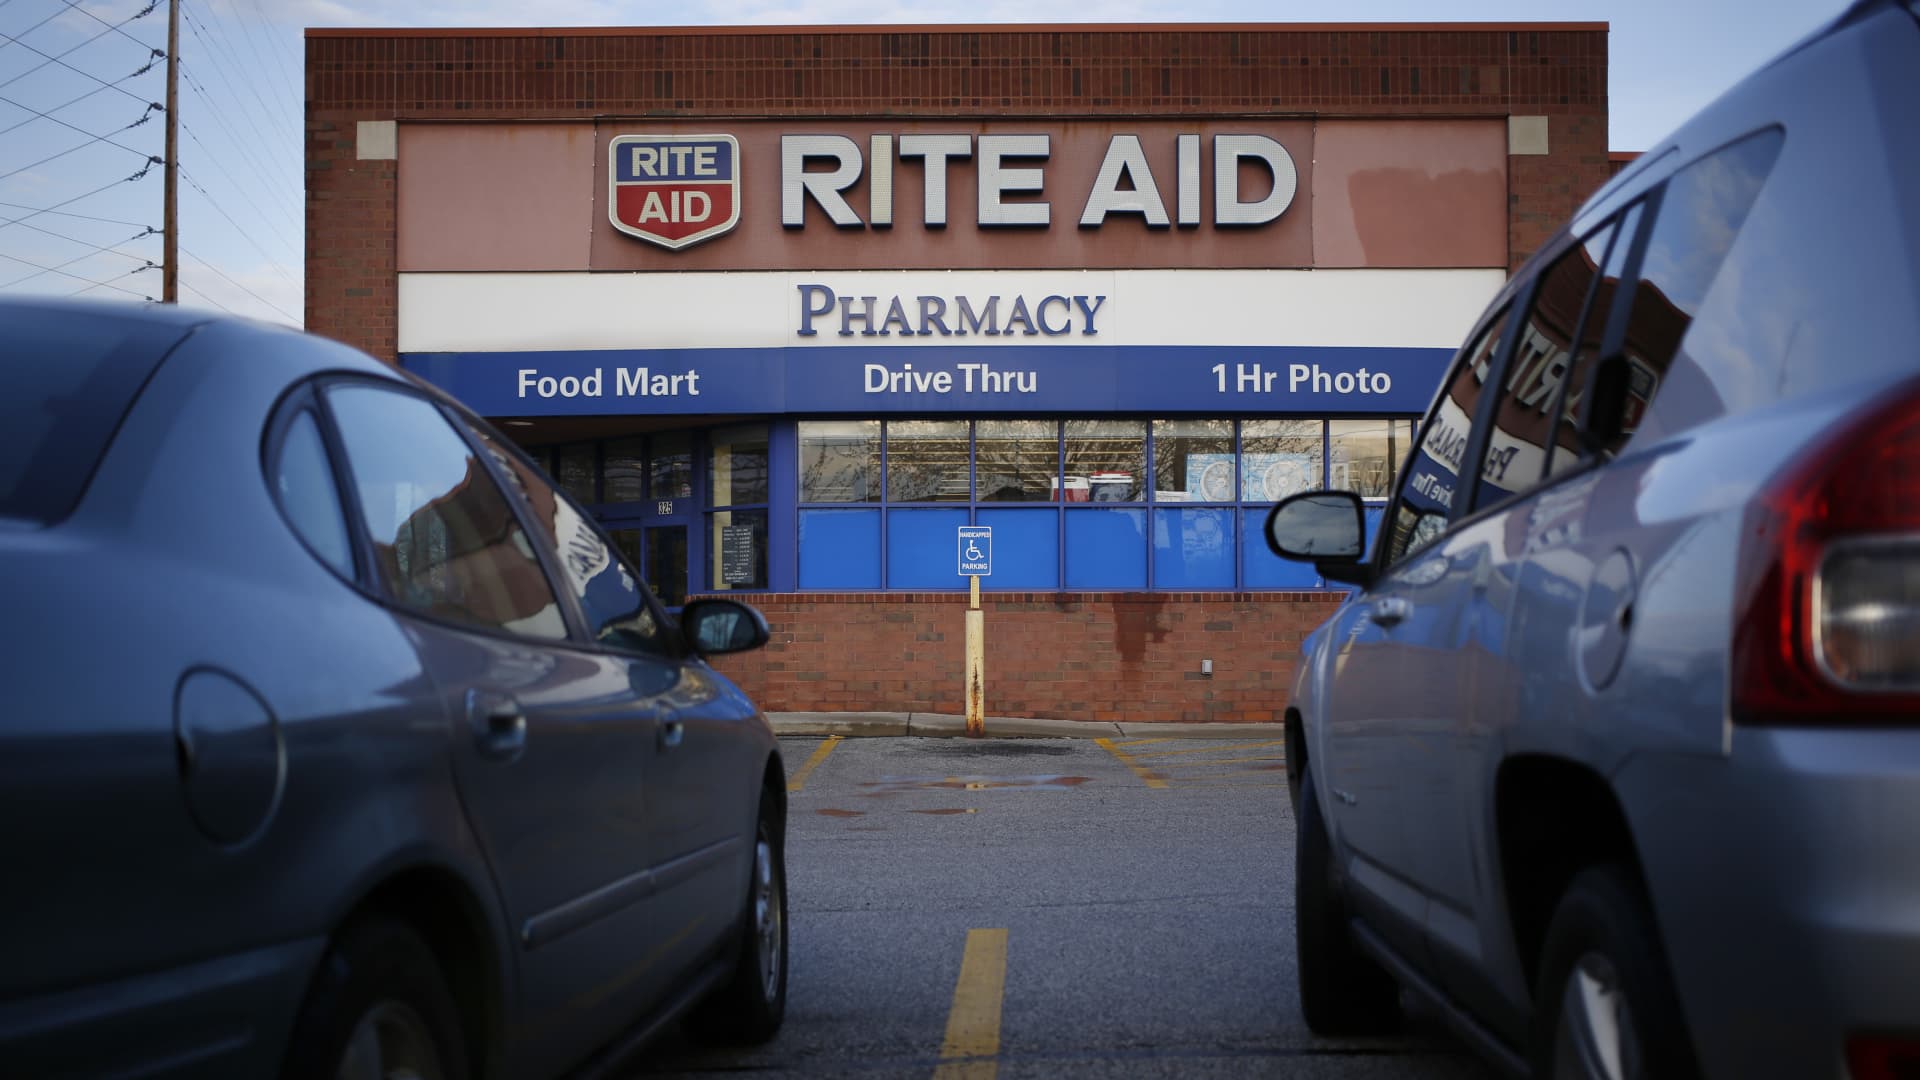 Stocks making the biggest moves midday: Rite Aid, Nike, Six Flags and more